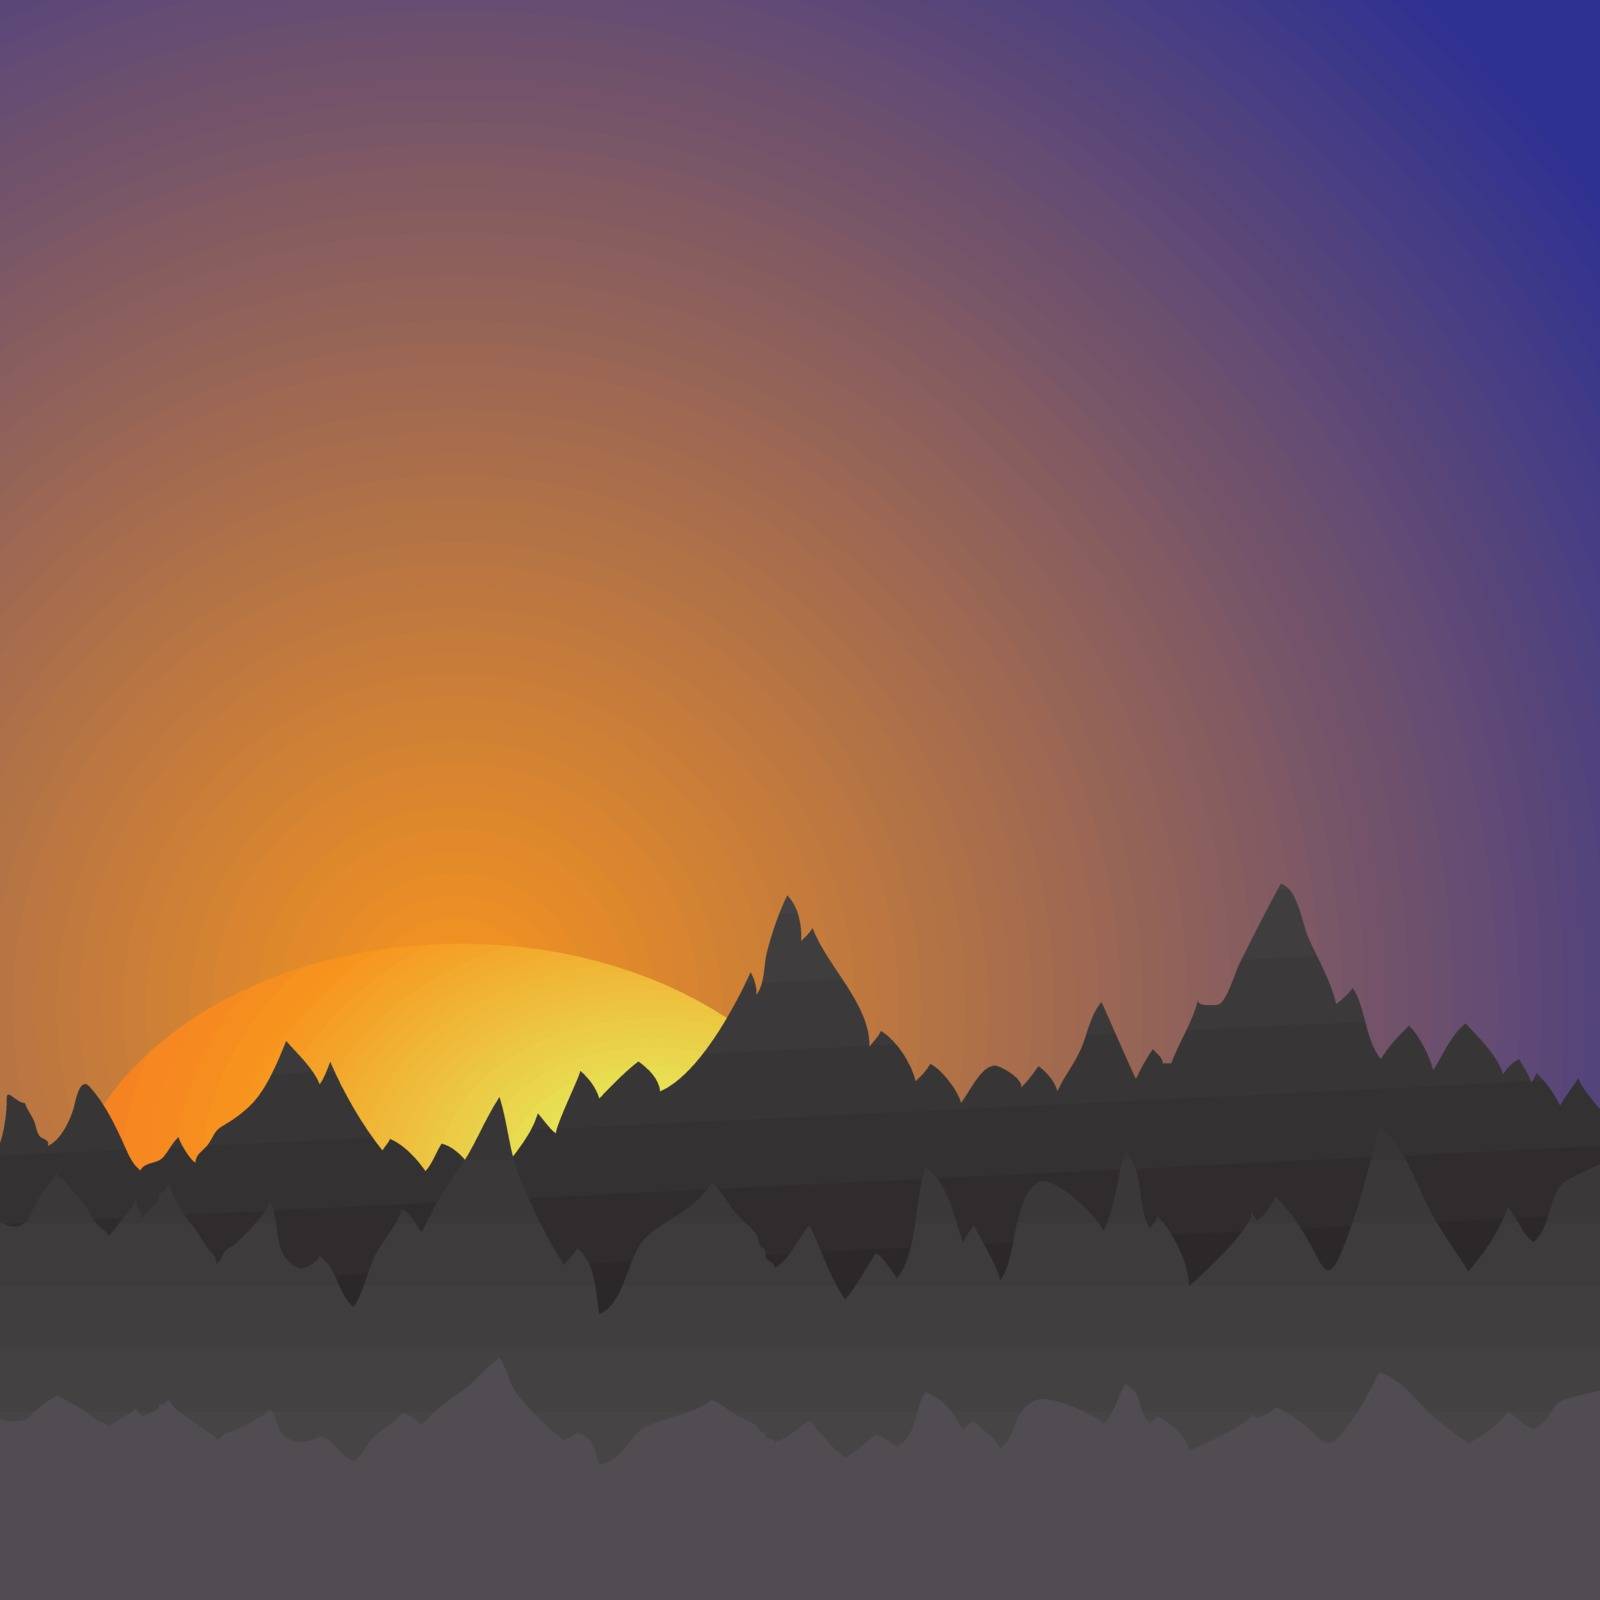 The Sun Sets Behind The Mountains. Mountain Landscape